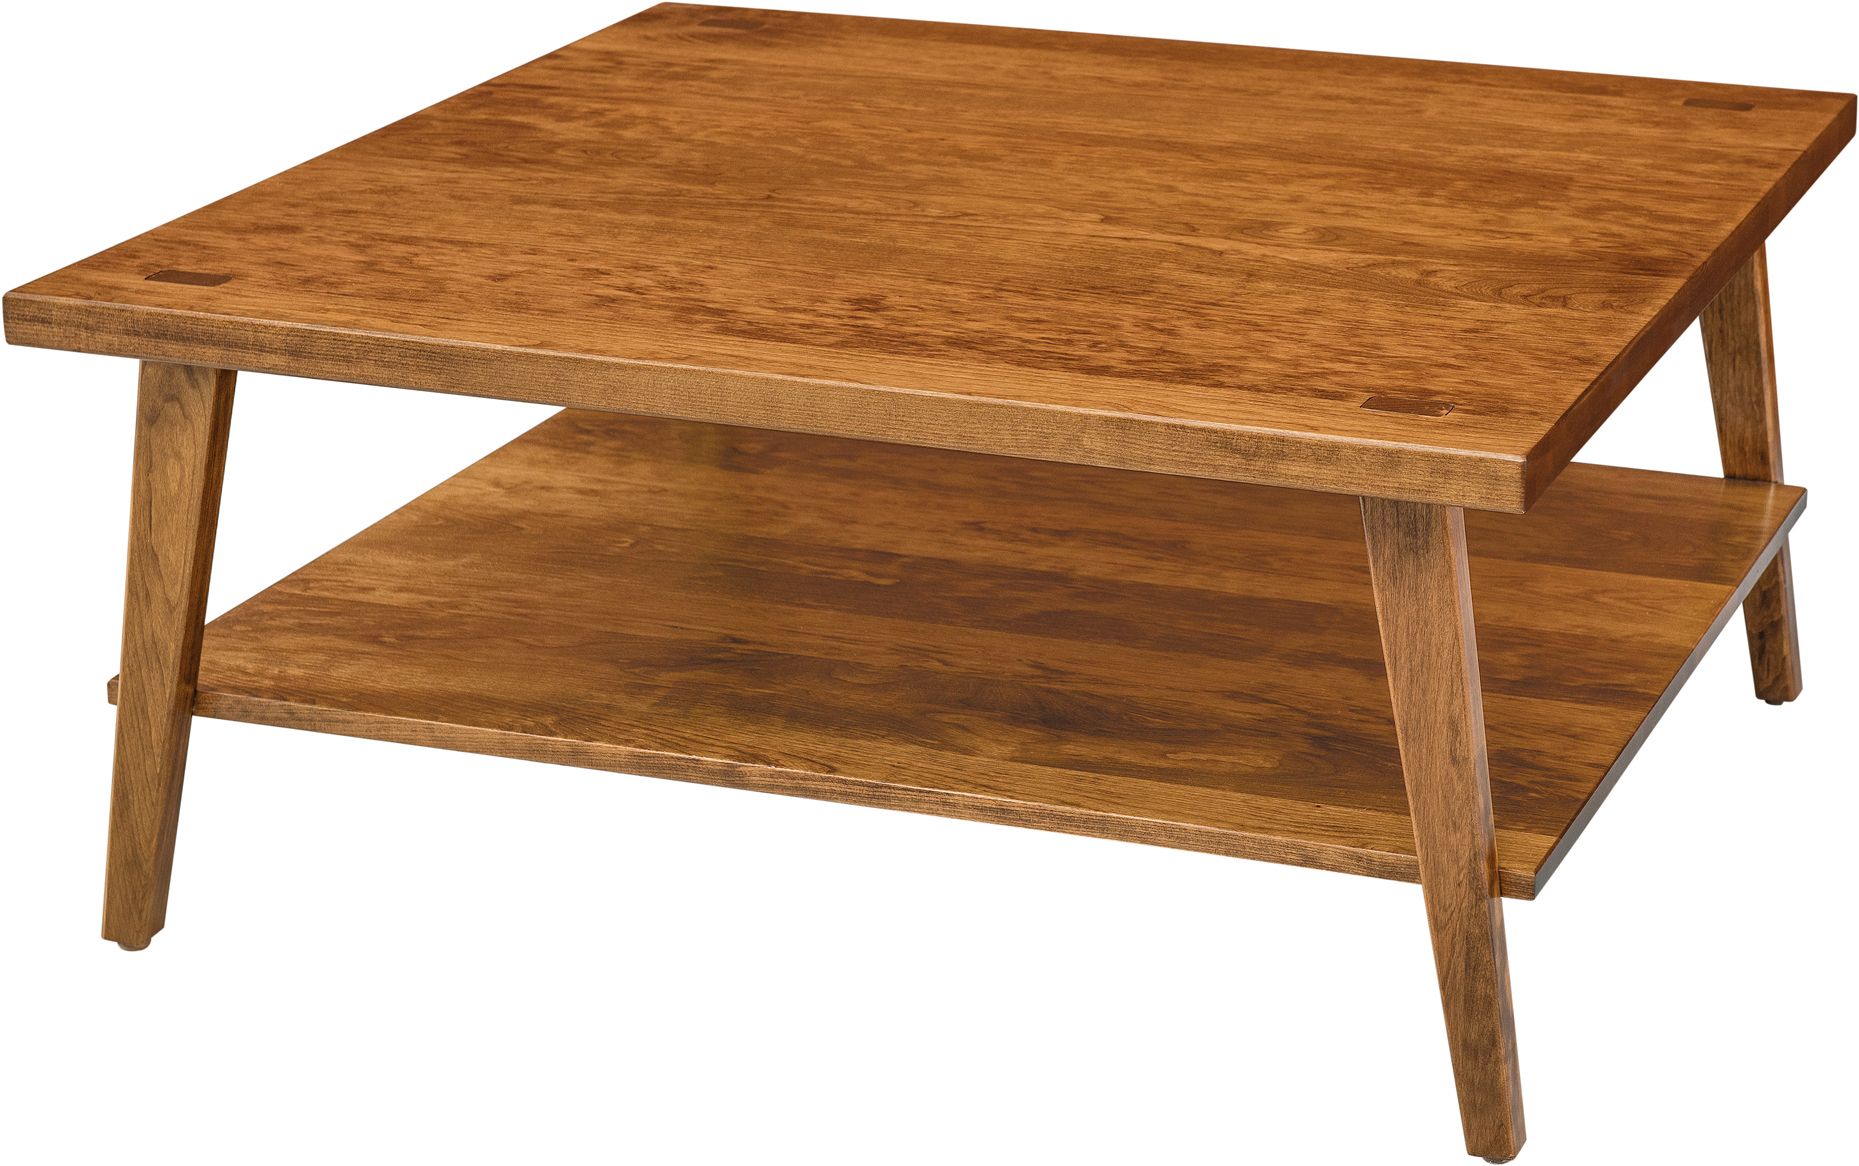 Zemple Square Coffee Table | Amish Coffee Table | Wood Pertaining To Smoke Gray Wood Square Coffee Tables (View 9 of 15)